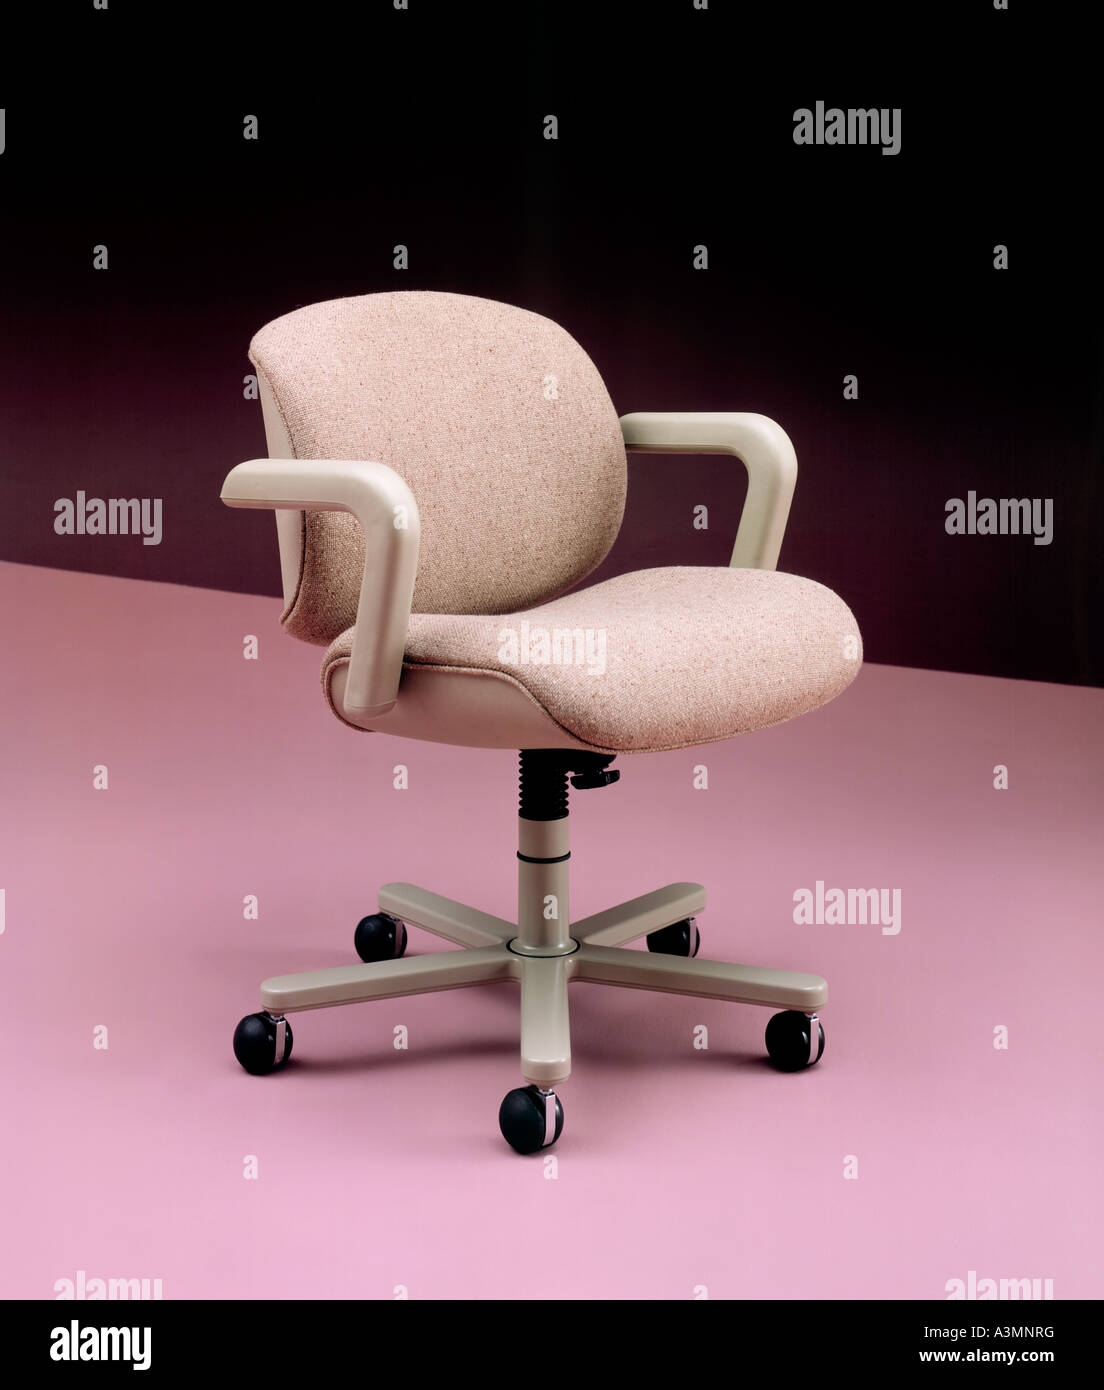 business furniture chair roller casters armrest arm rest pink floor background Stock Photo